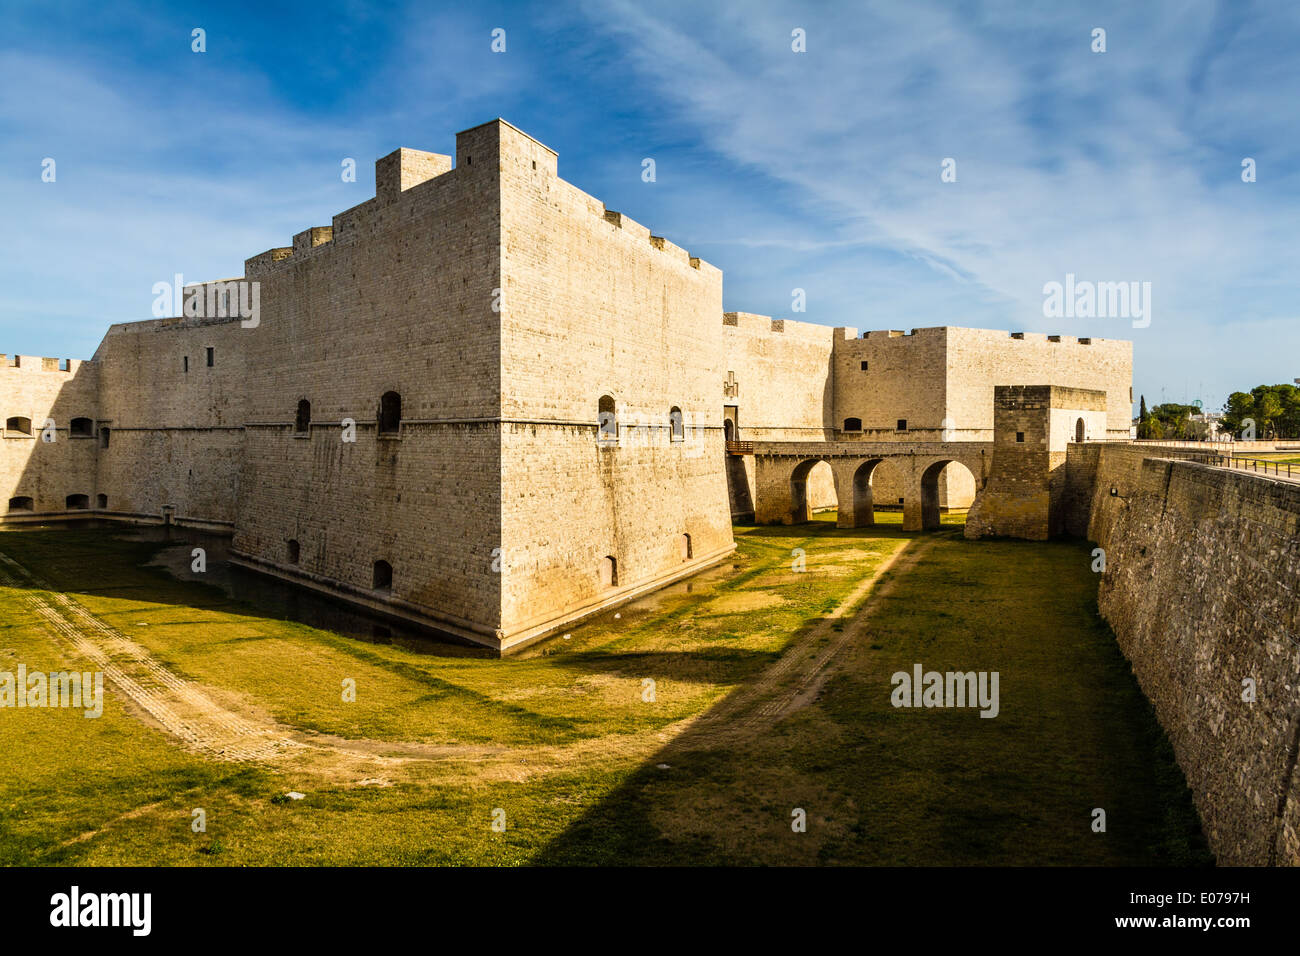 detail of the castle of Barletta, a city located in Apulia, south Italy Stock Photo